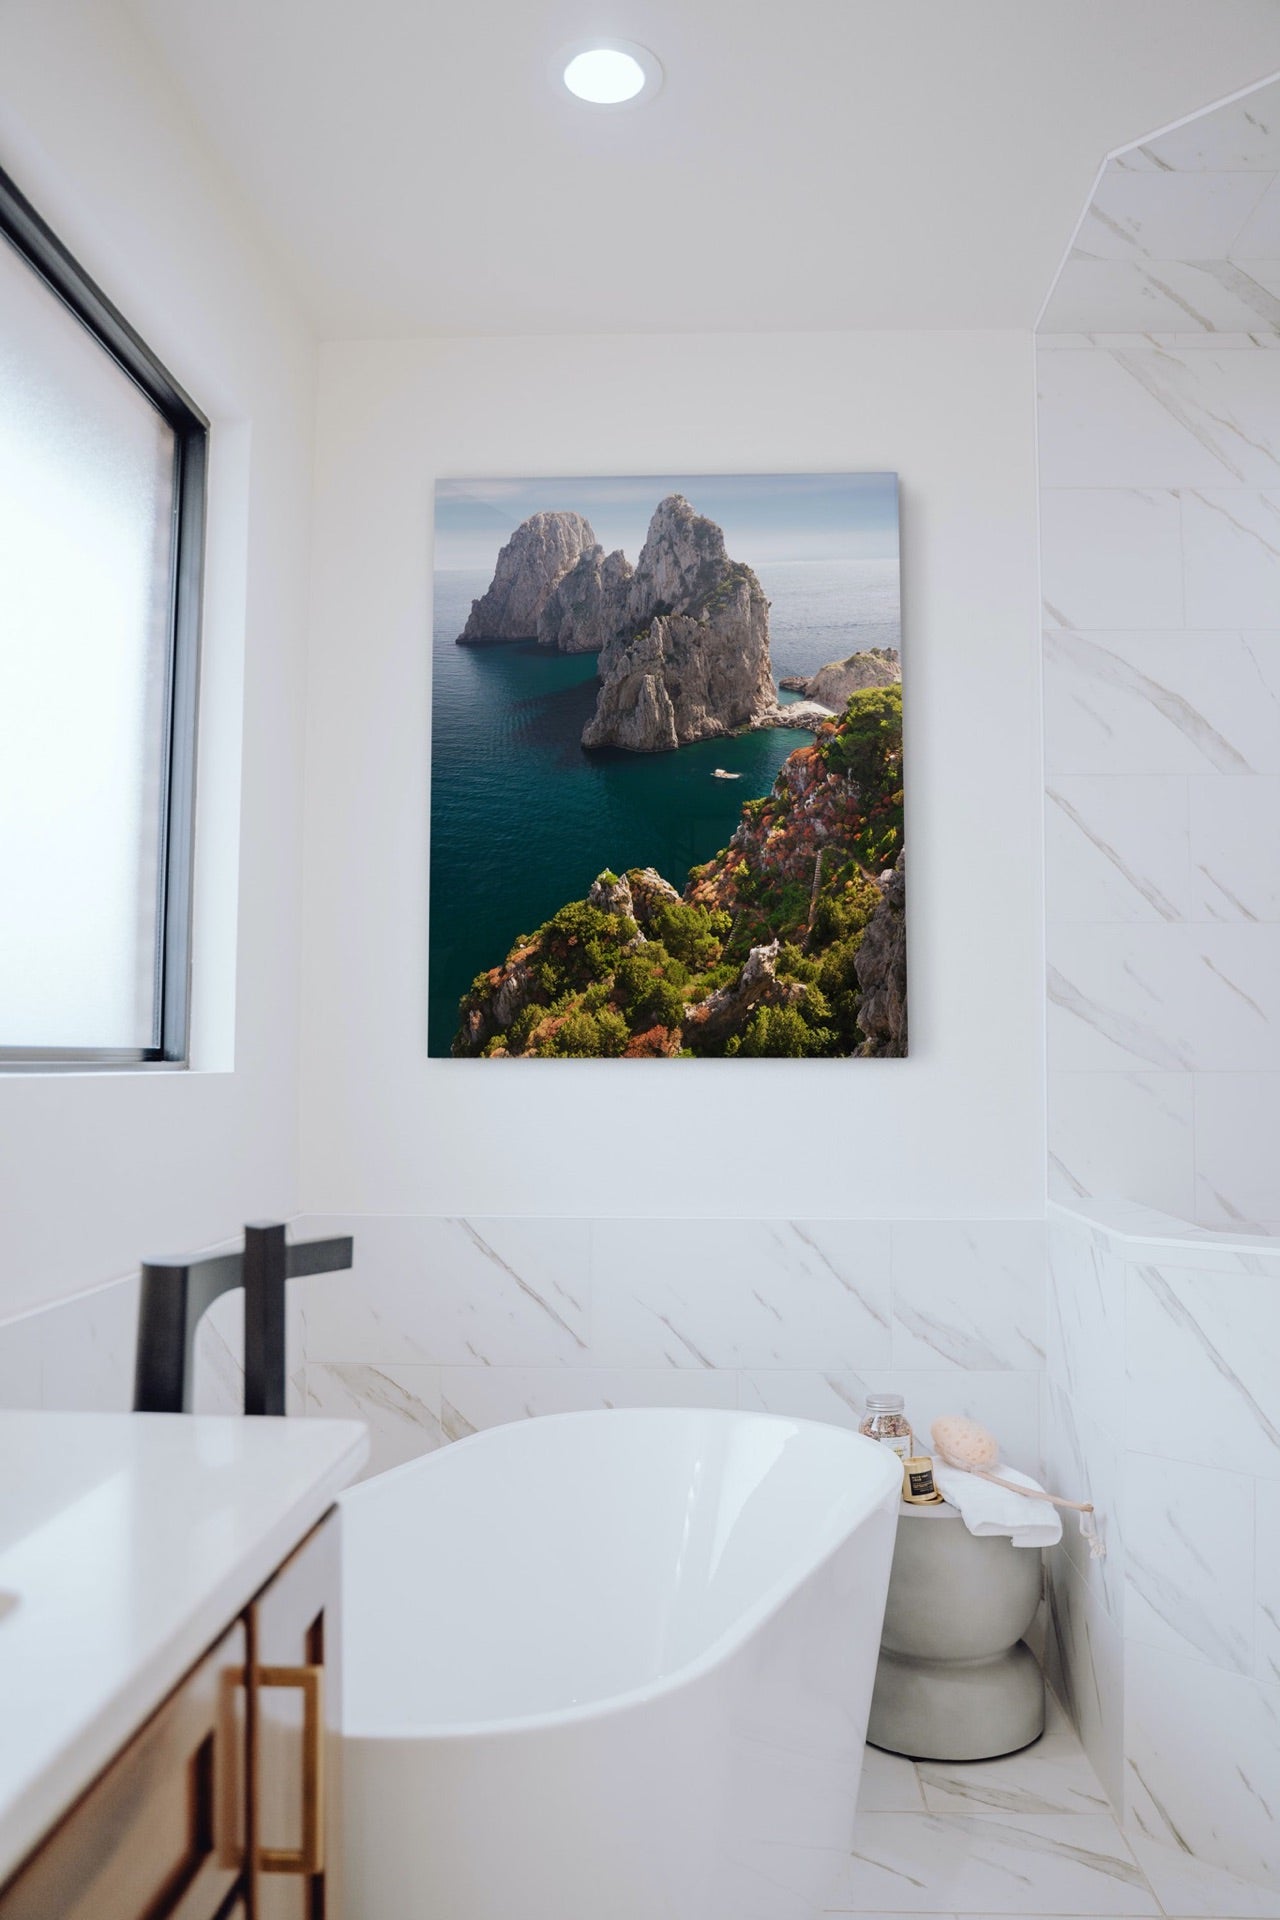 Italy picture over tub